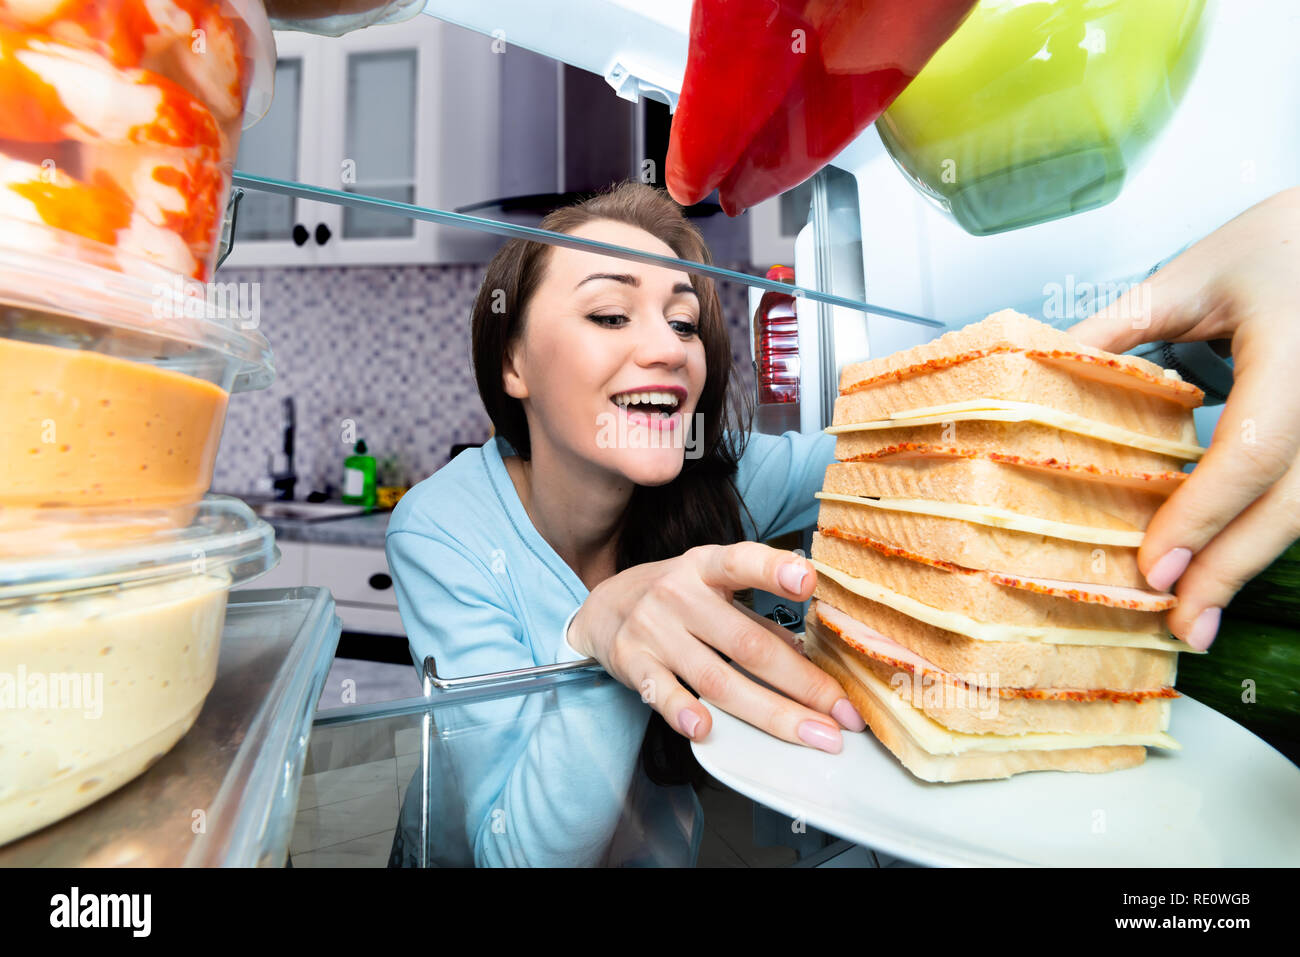 Happy Young Woman Taking Big Sandwich From Refrigerator Stock Photo